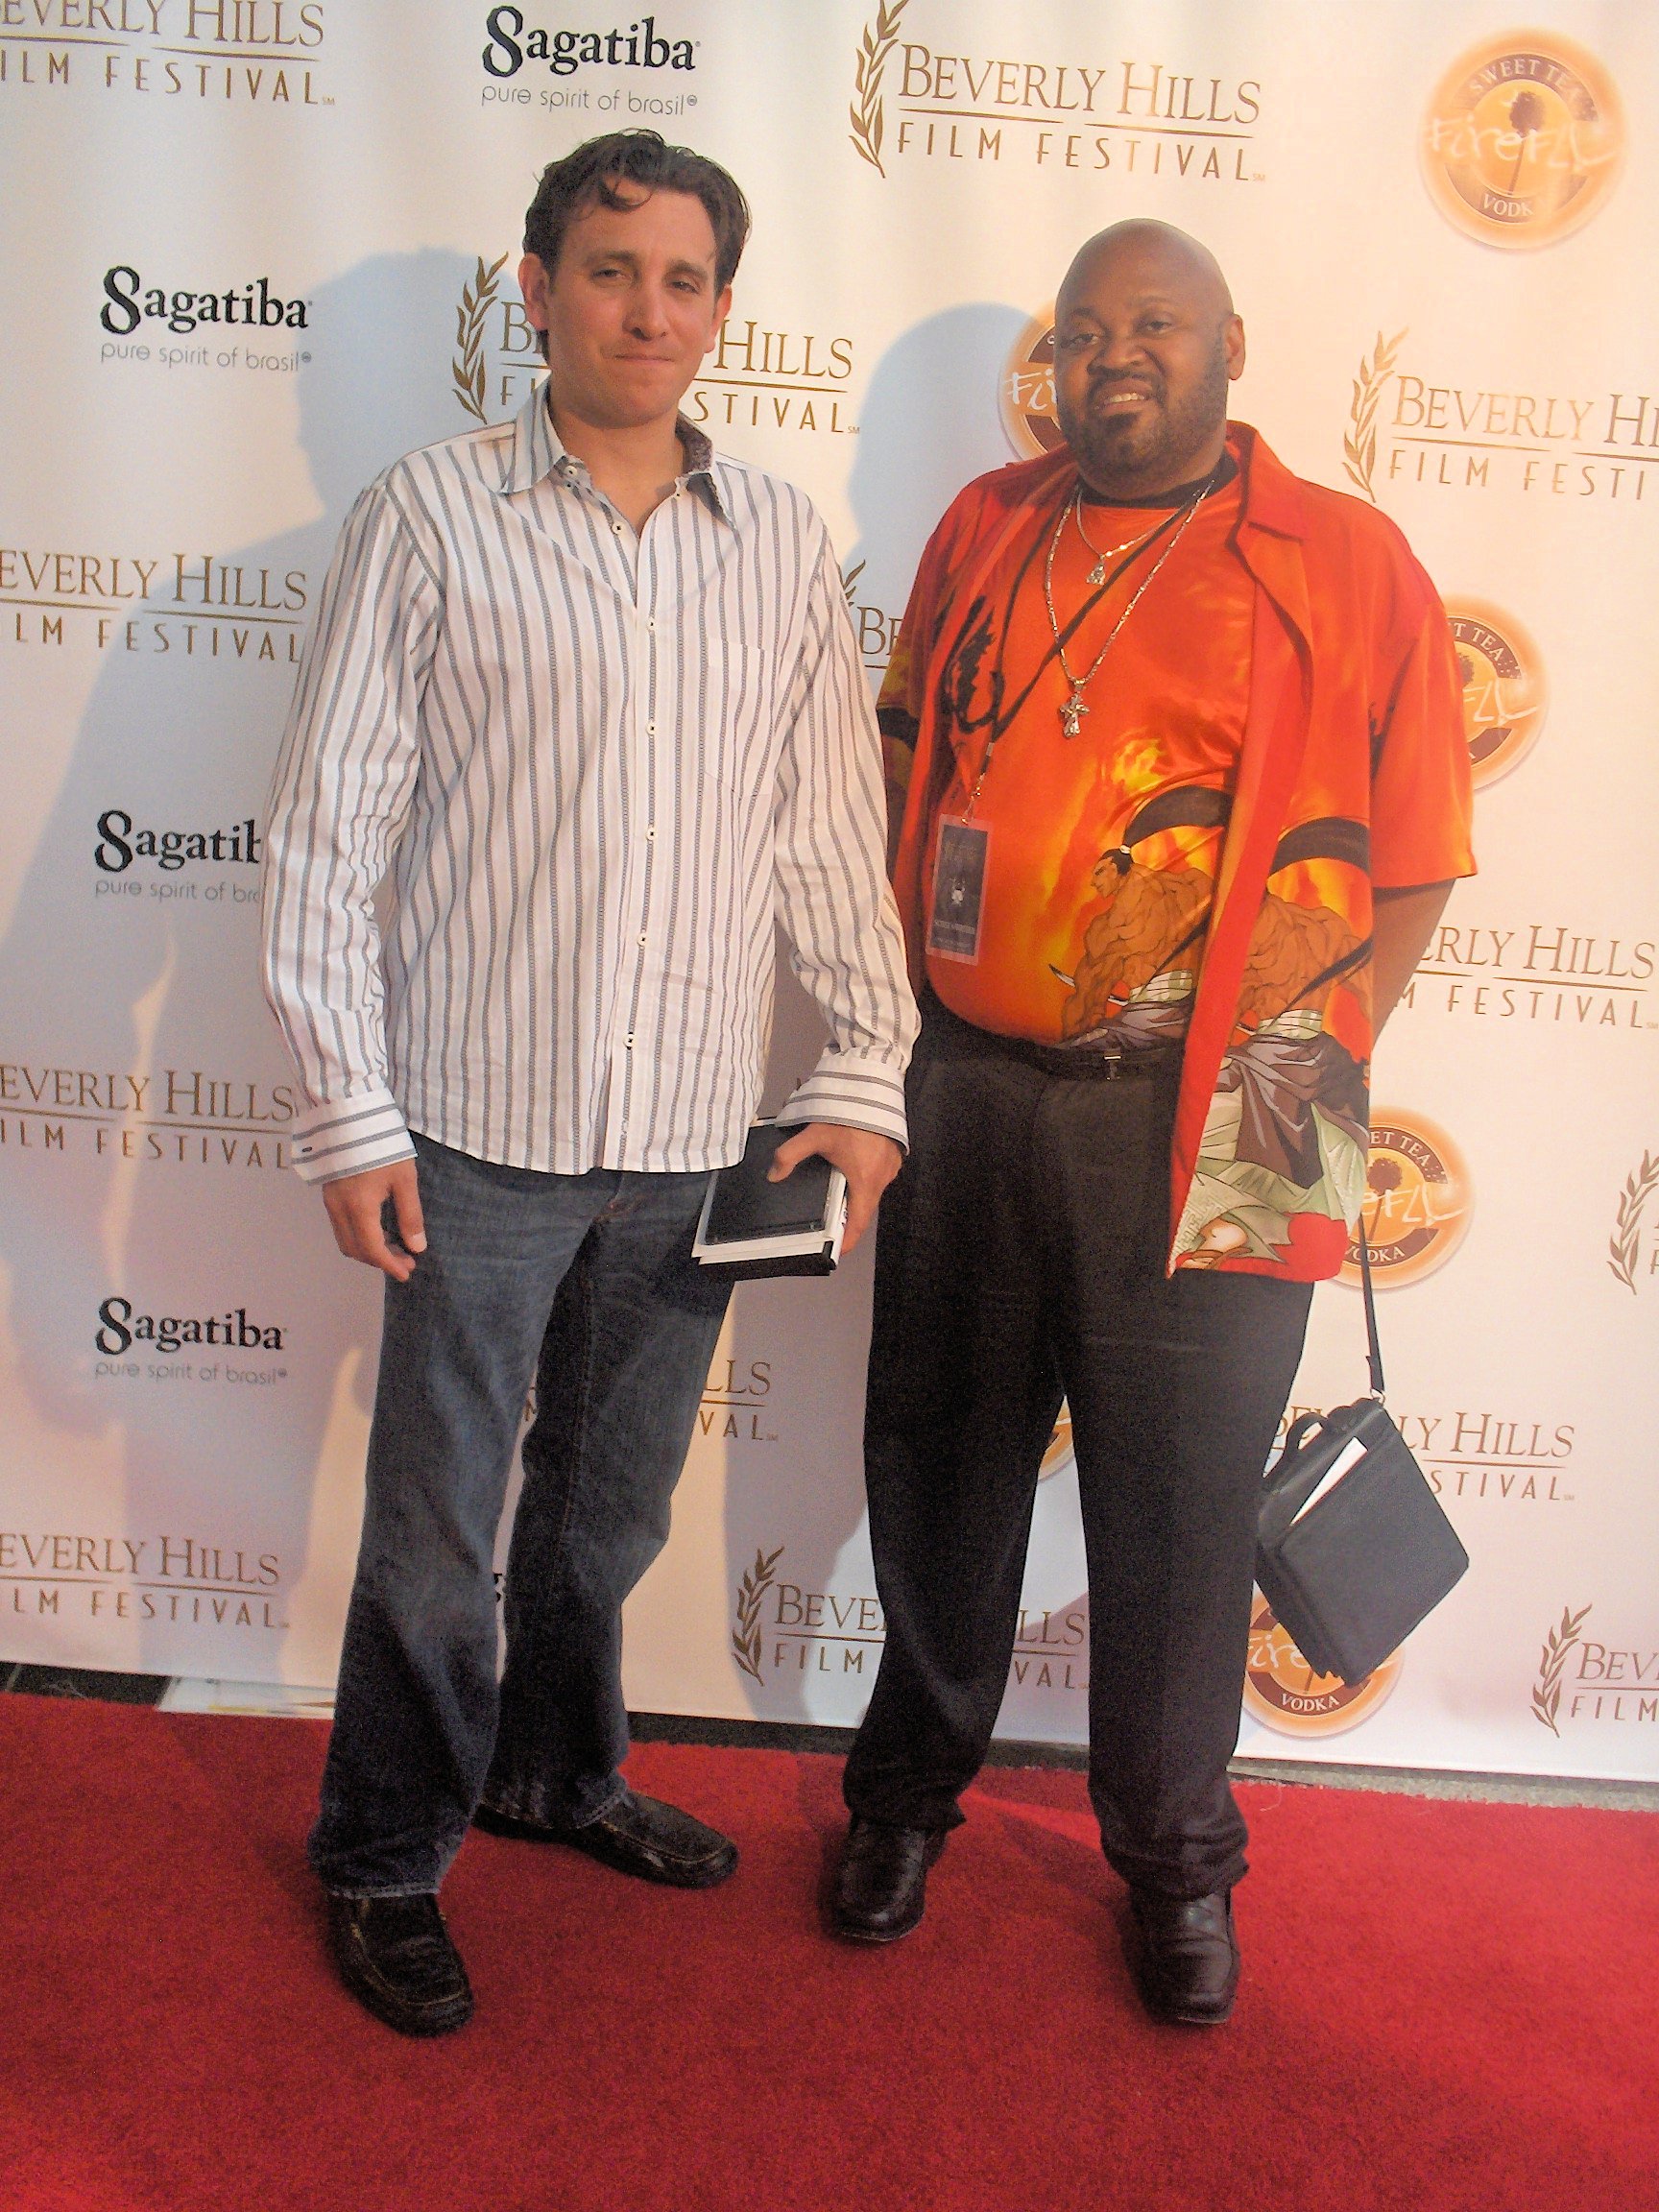 At the Beverly Hills Film Festival with actor Matteo Indelicato